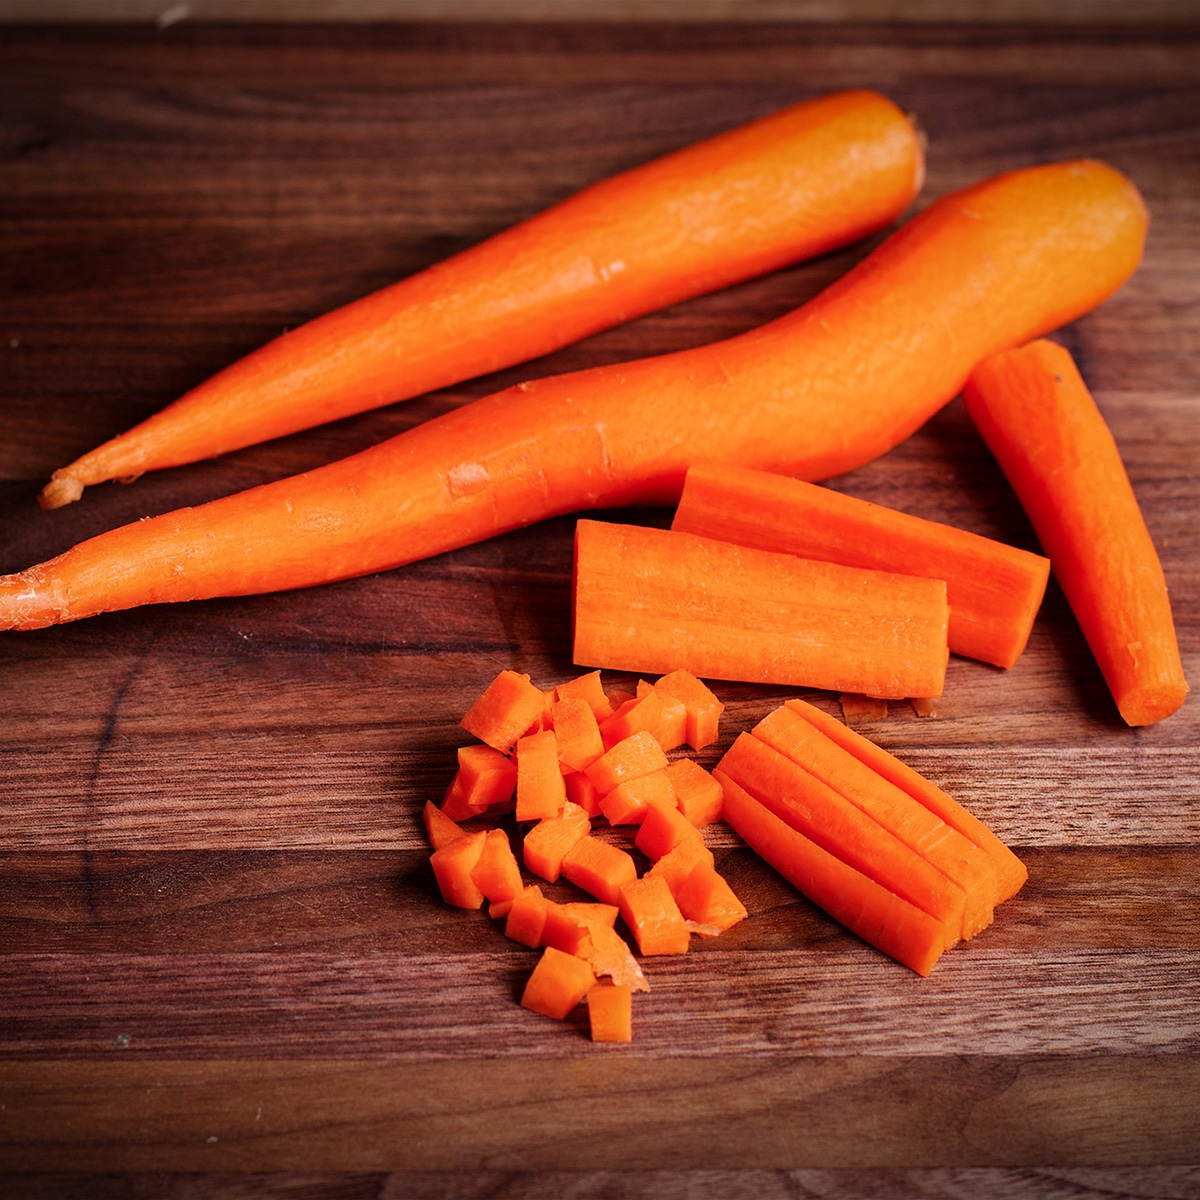 How to chop a carrot into sticks then into small pieces.